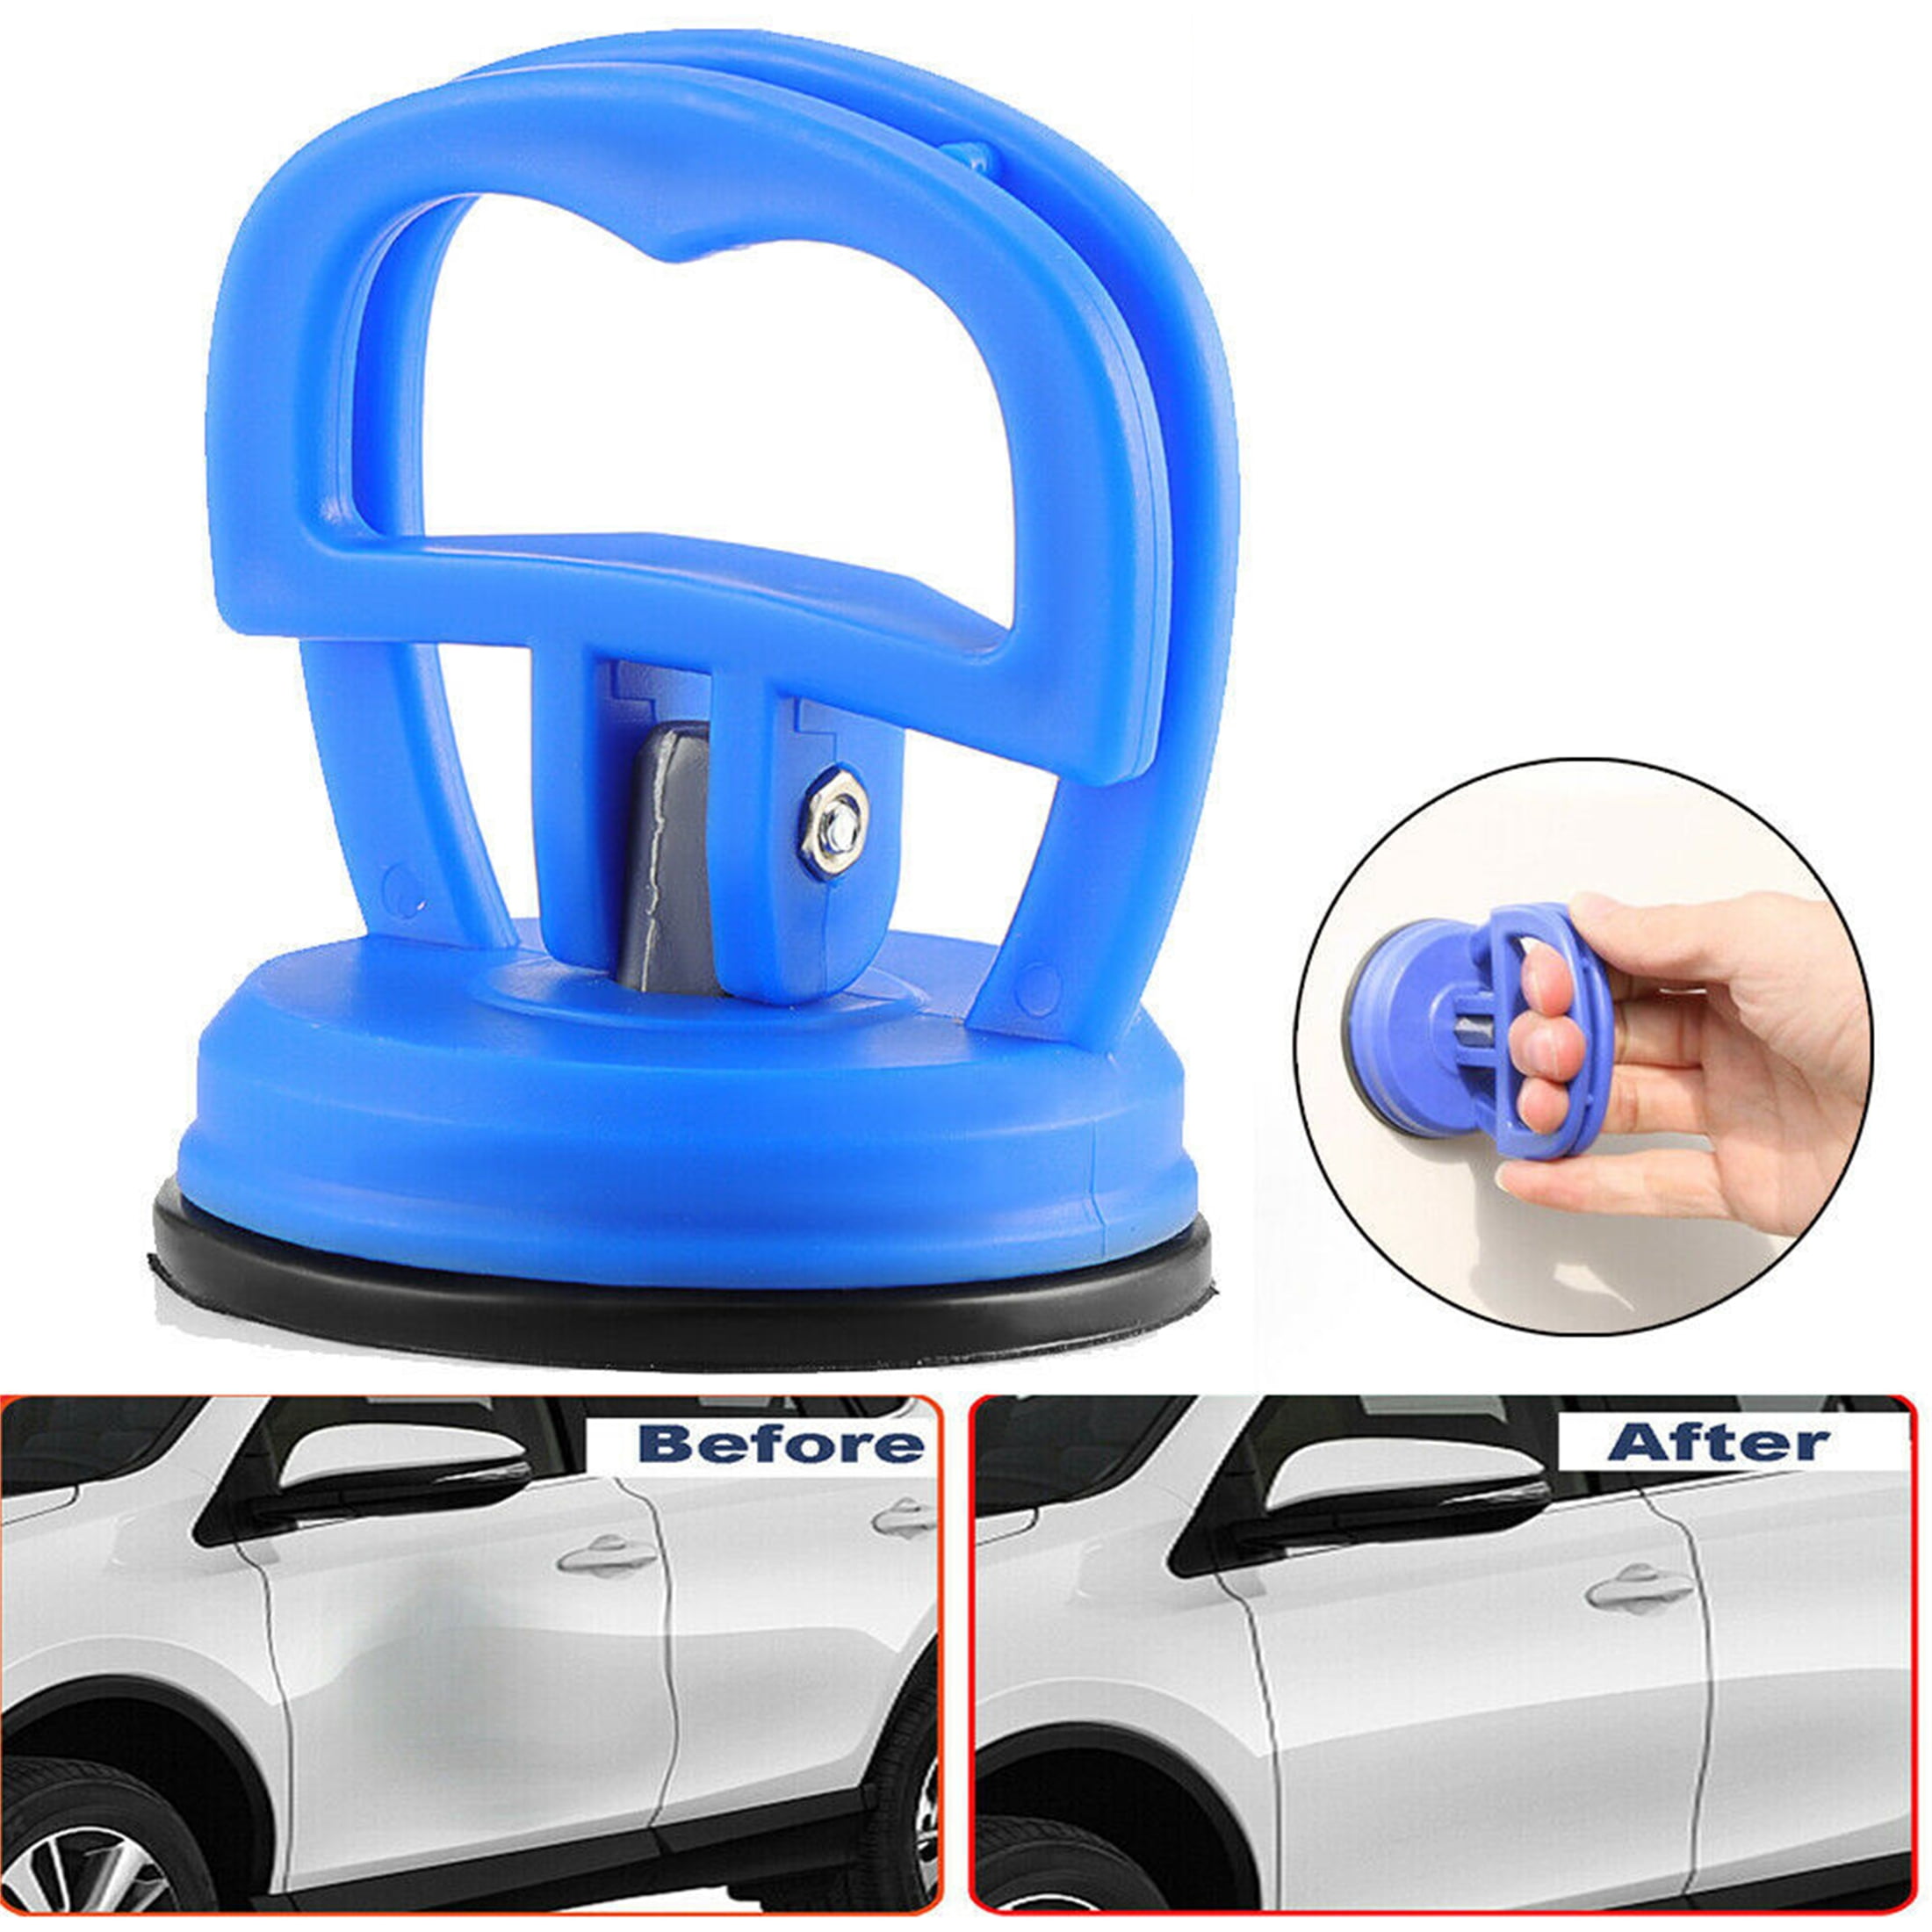 806B 0D0A Car Vehicle Dent Repair Puller Remover Bodywork Renew Bump Suction Cup 